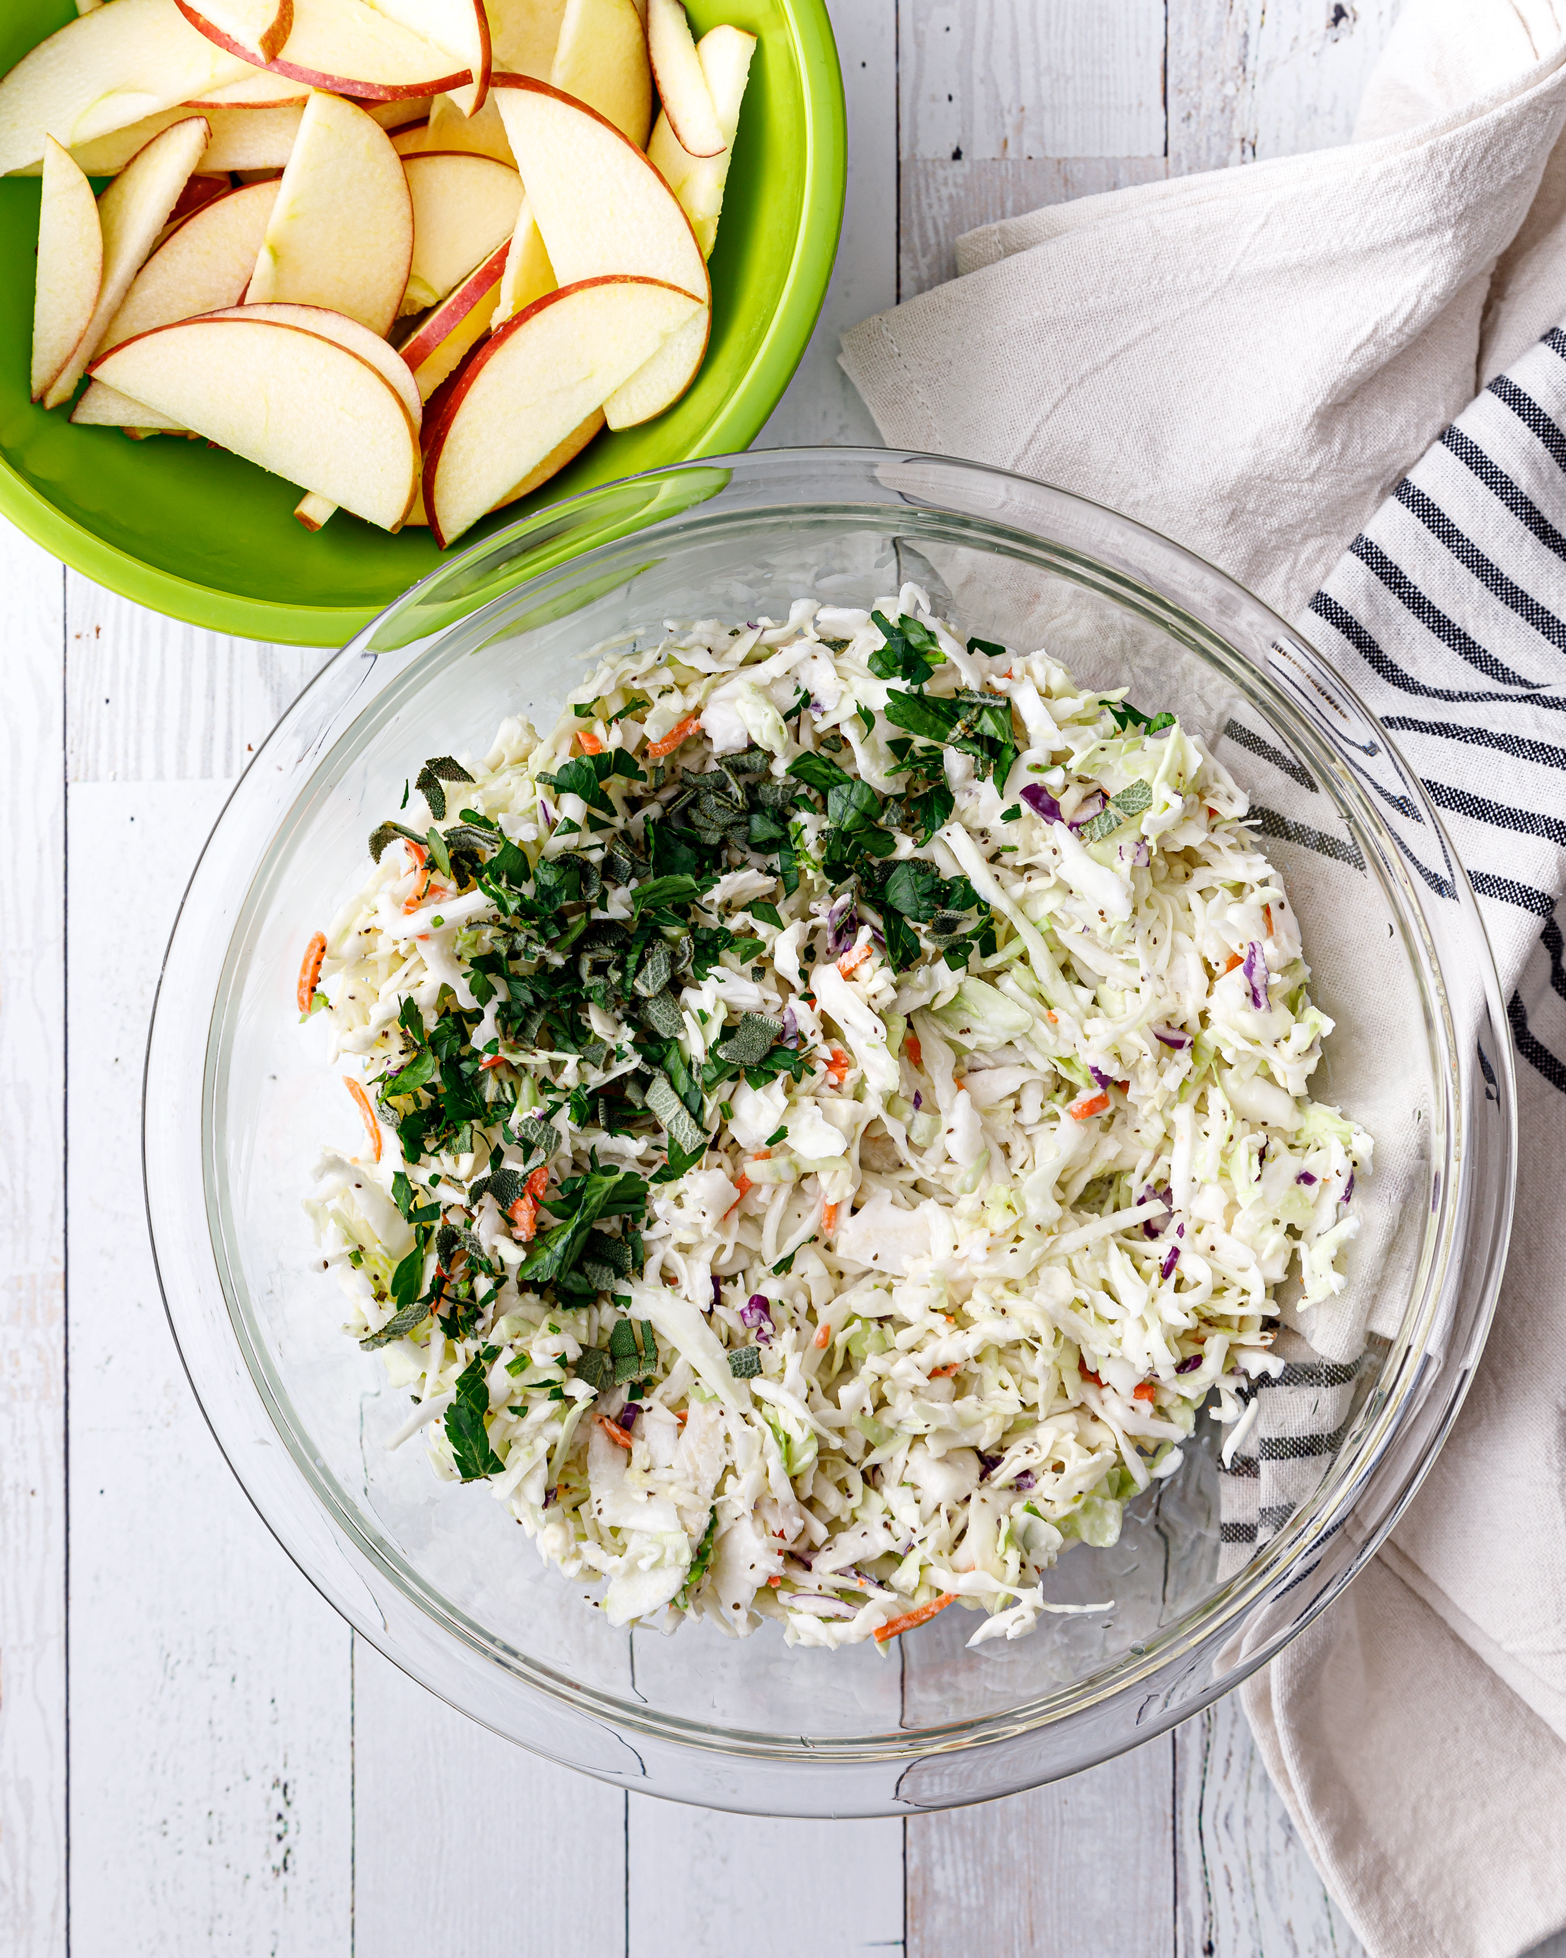 a glas bowl of creamy whole30 coleslaw next to a green bowl filled with apple sauces with a white a blue dish cloth next to both bowls